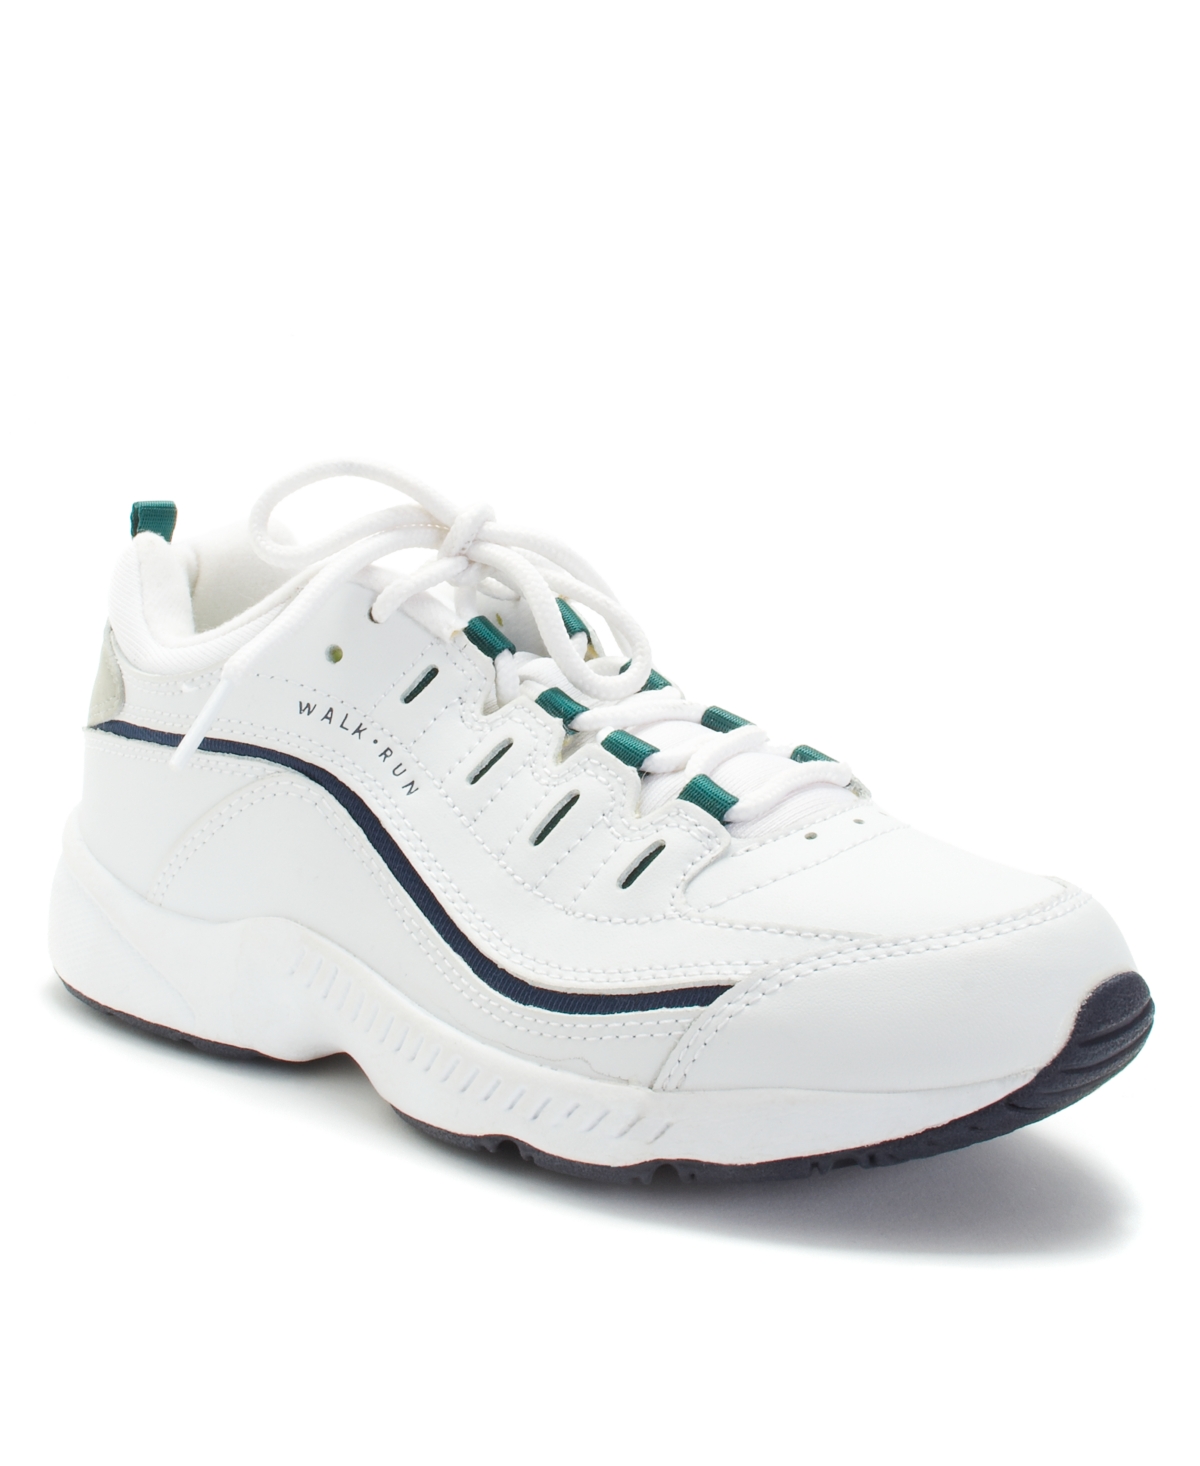 UPC 029005264446 product image for Easy Spirit Women's Romy Round Toe Casual Lace Up Walking Shoes Women's Shoes | upcitemdb.com